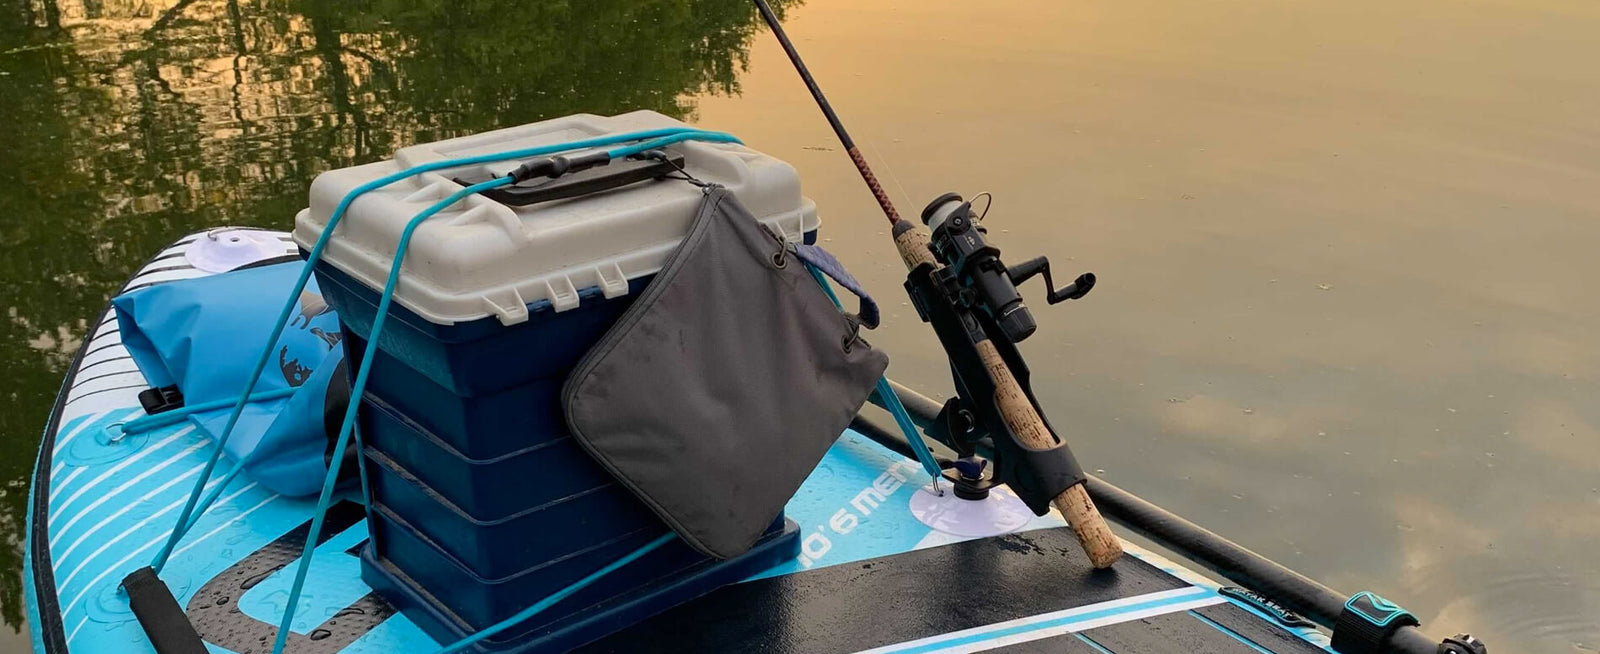 Best Guide On How To Get Started With SUP Fishing: Setup And Accessories -  The SUP HQ